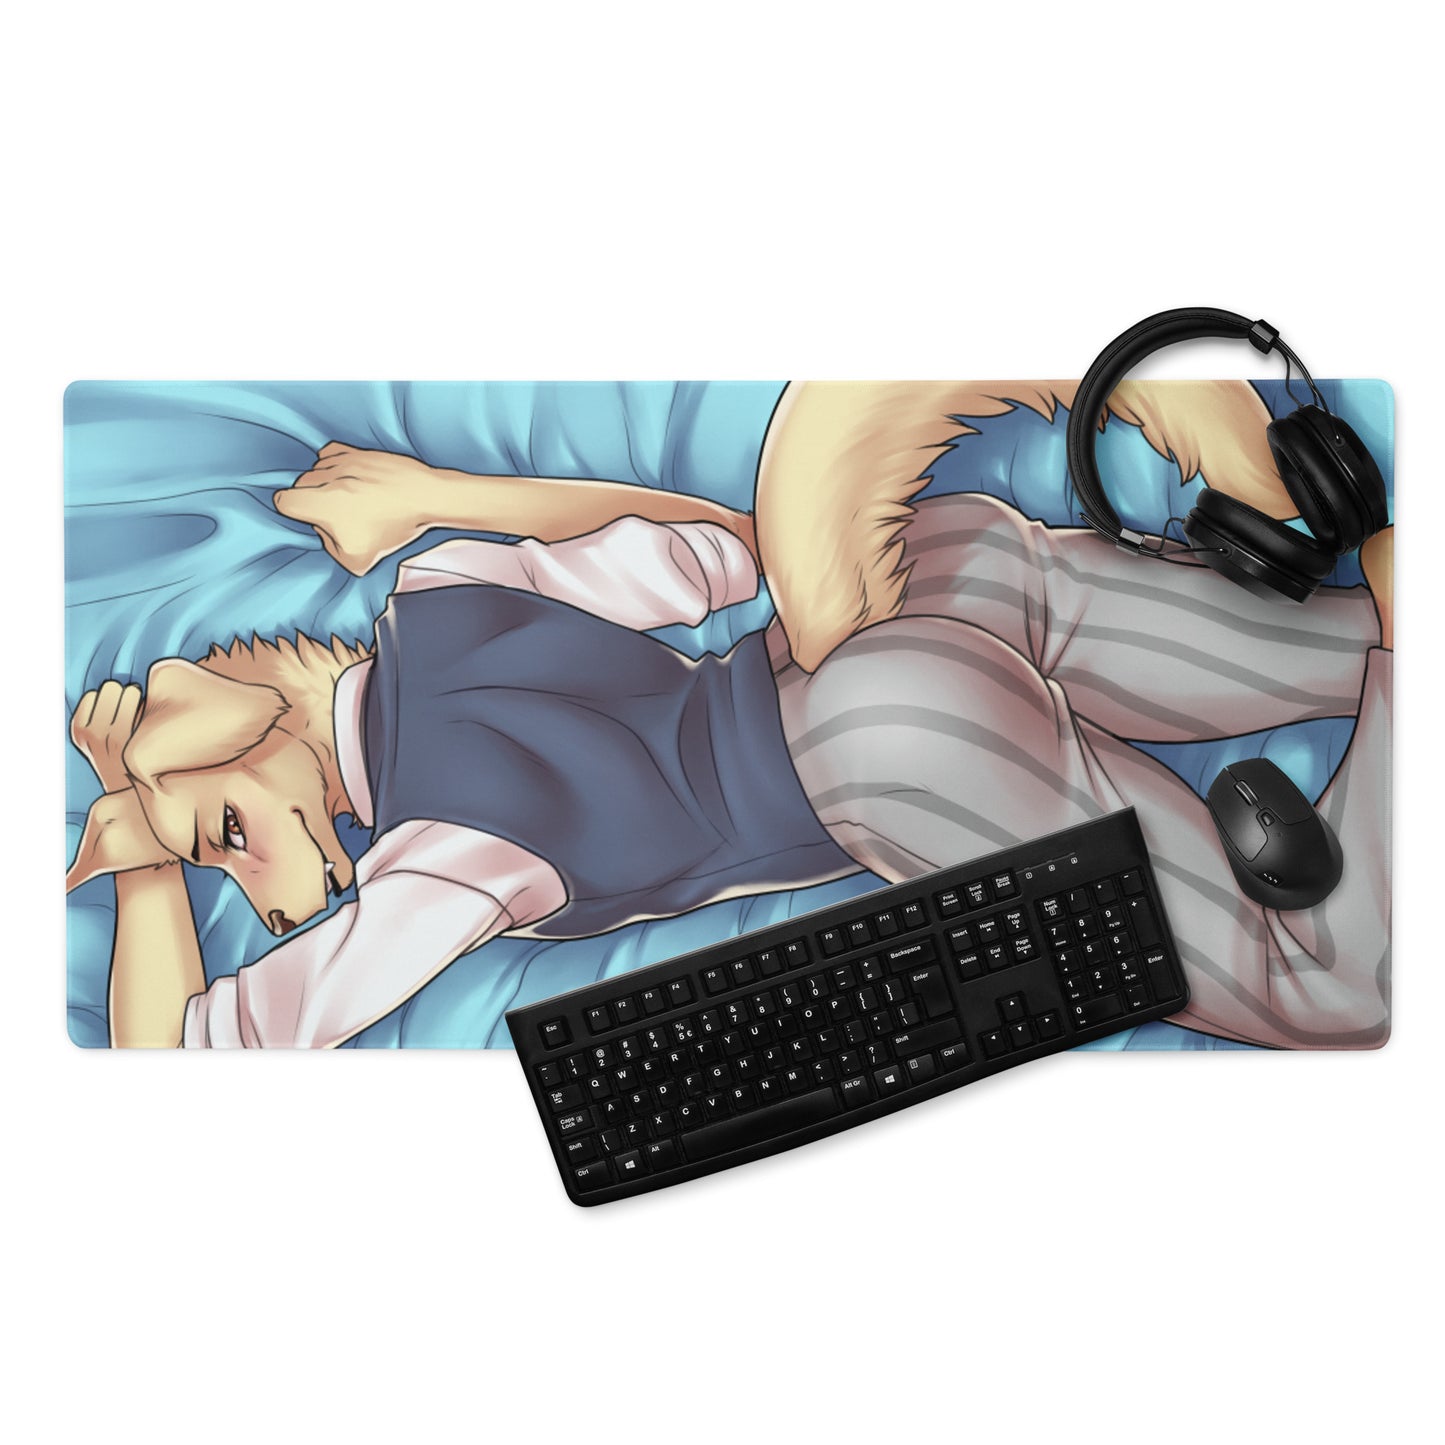 Jack (SFW) Gaming Mouse Pad Ver. 1